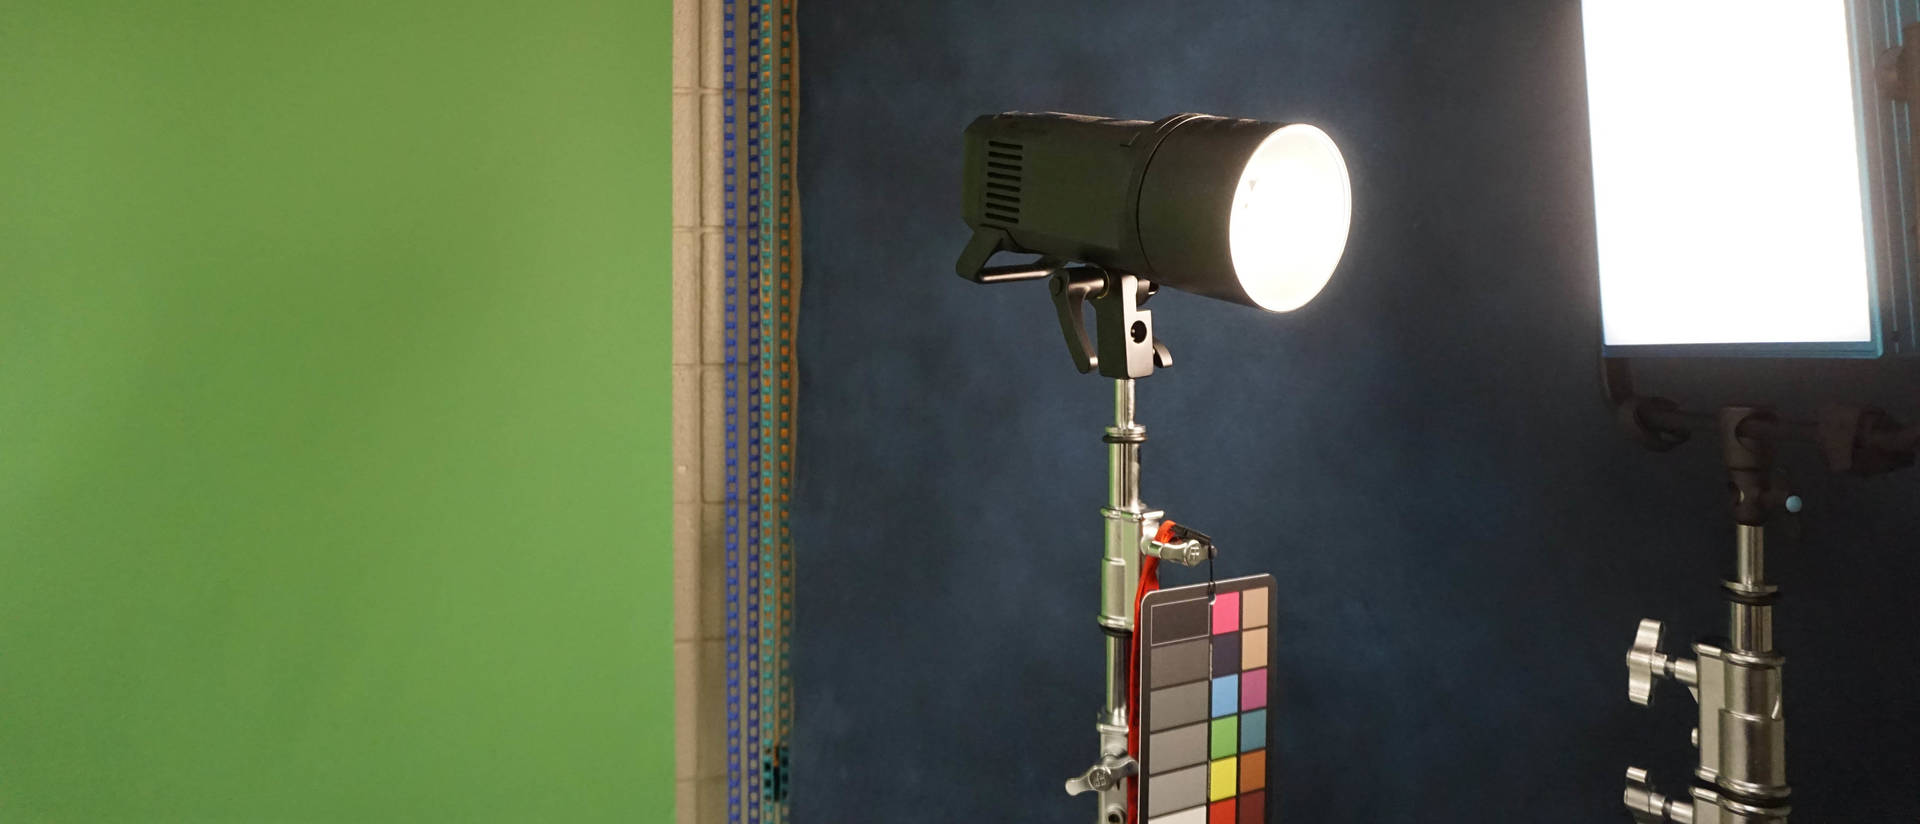 Two photography lights against a green screen